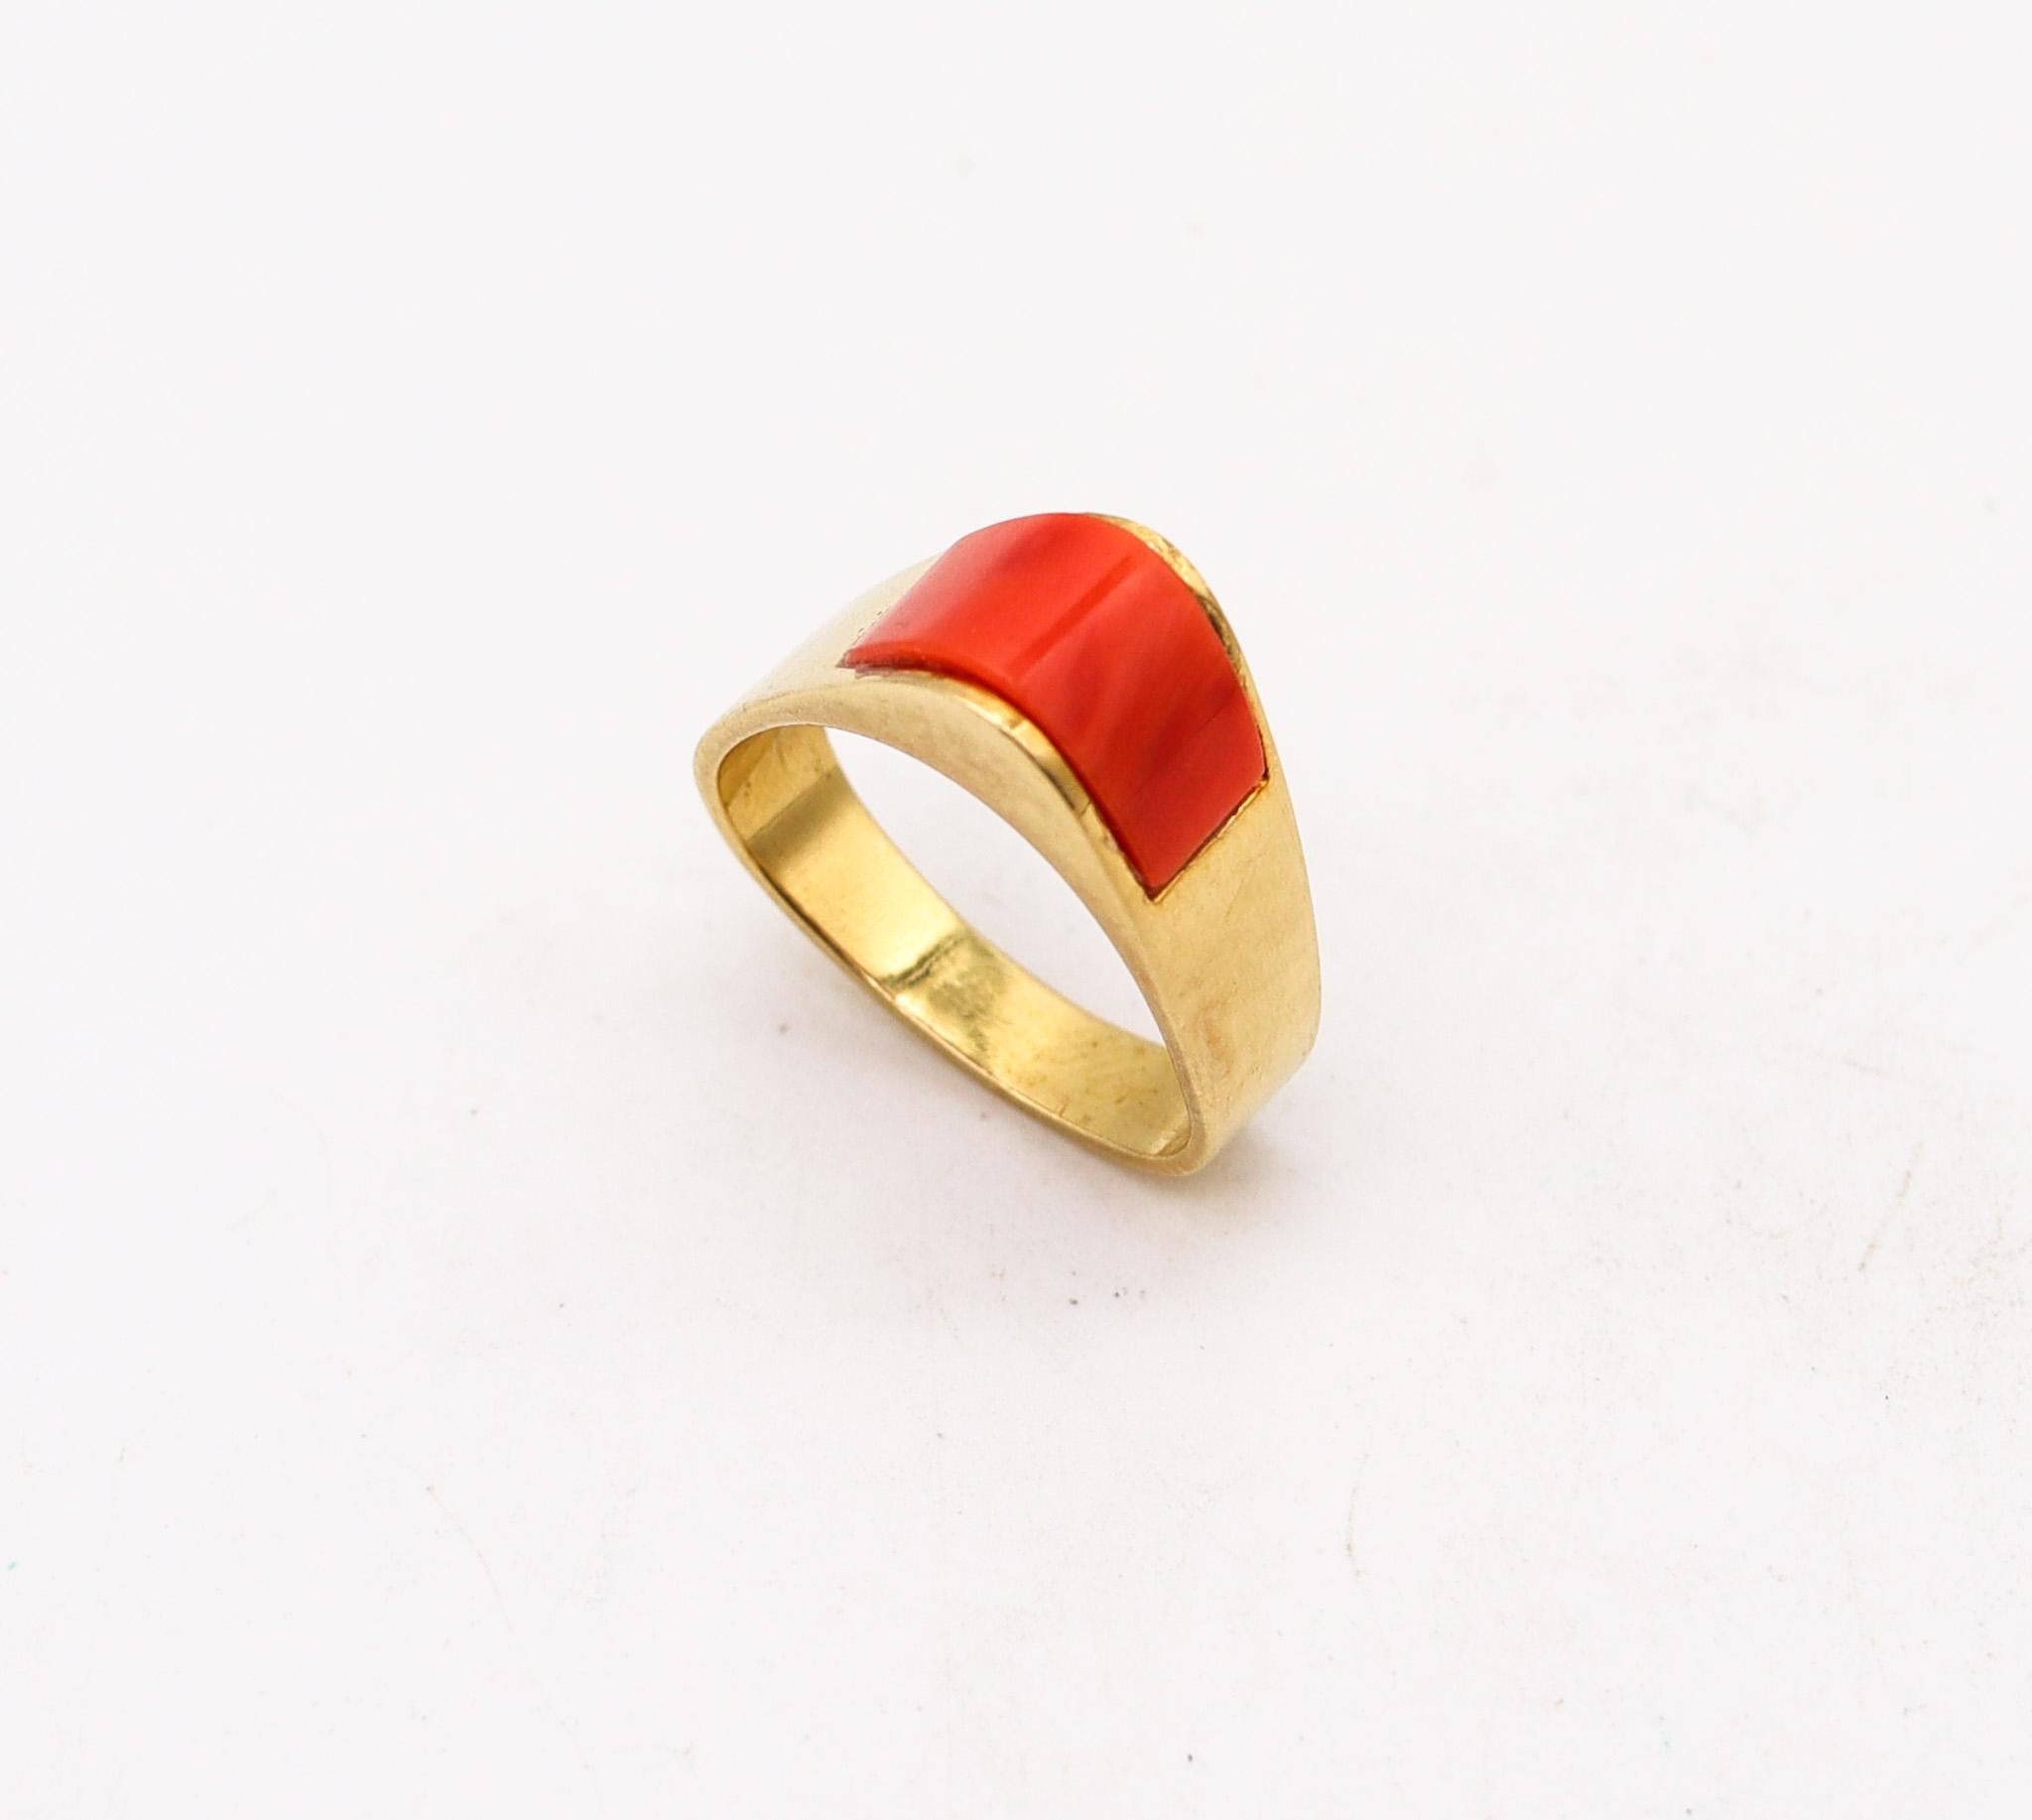 Triangular ring designed by Octavio Sarda Palau.

Beautiful triangular ring, created in Barcelona Spain by the artist goldsmith Octavio Sarda Palau, back in the 1970. This unusual geometric ring has been made with Bauhaus parameters of the golden